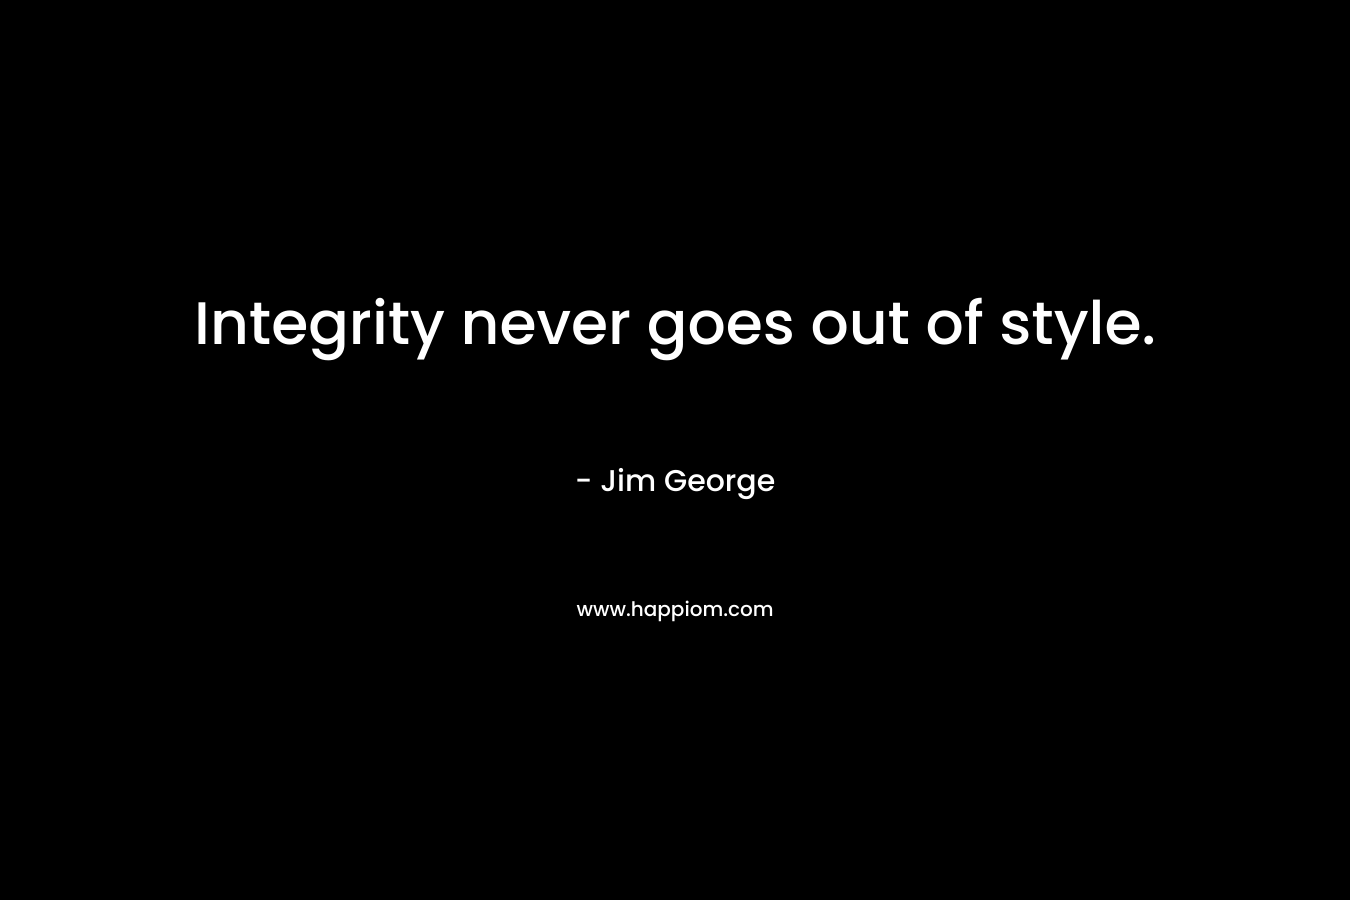 Integrity never goes out of style.